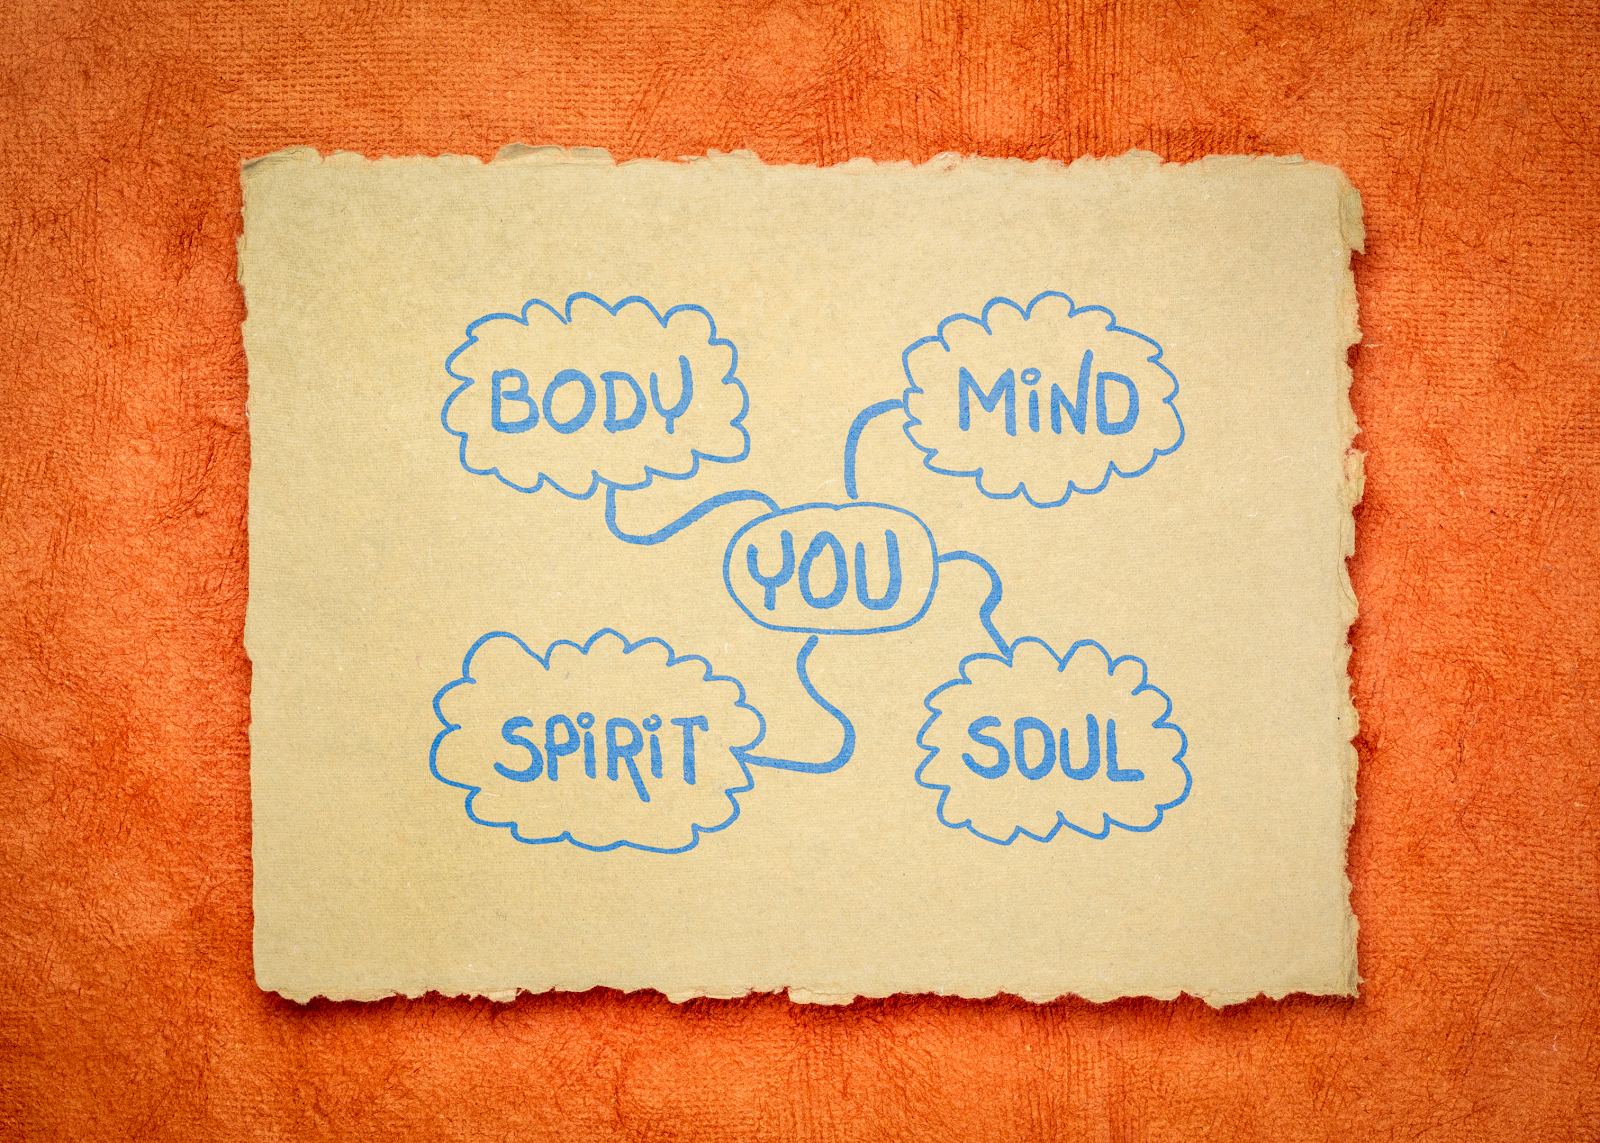 the relationship of body, mind, spirit and soul all back to the center word "you".